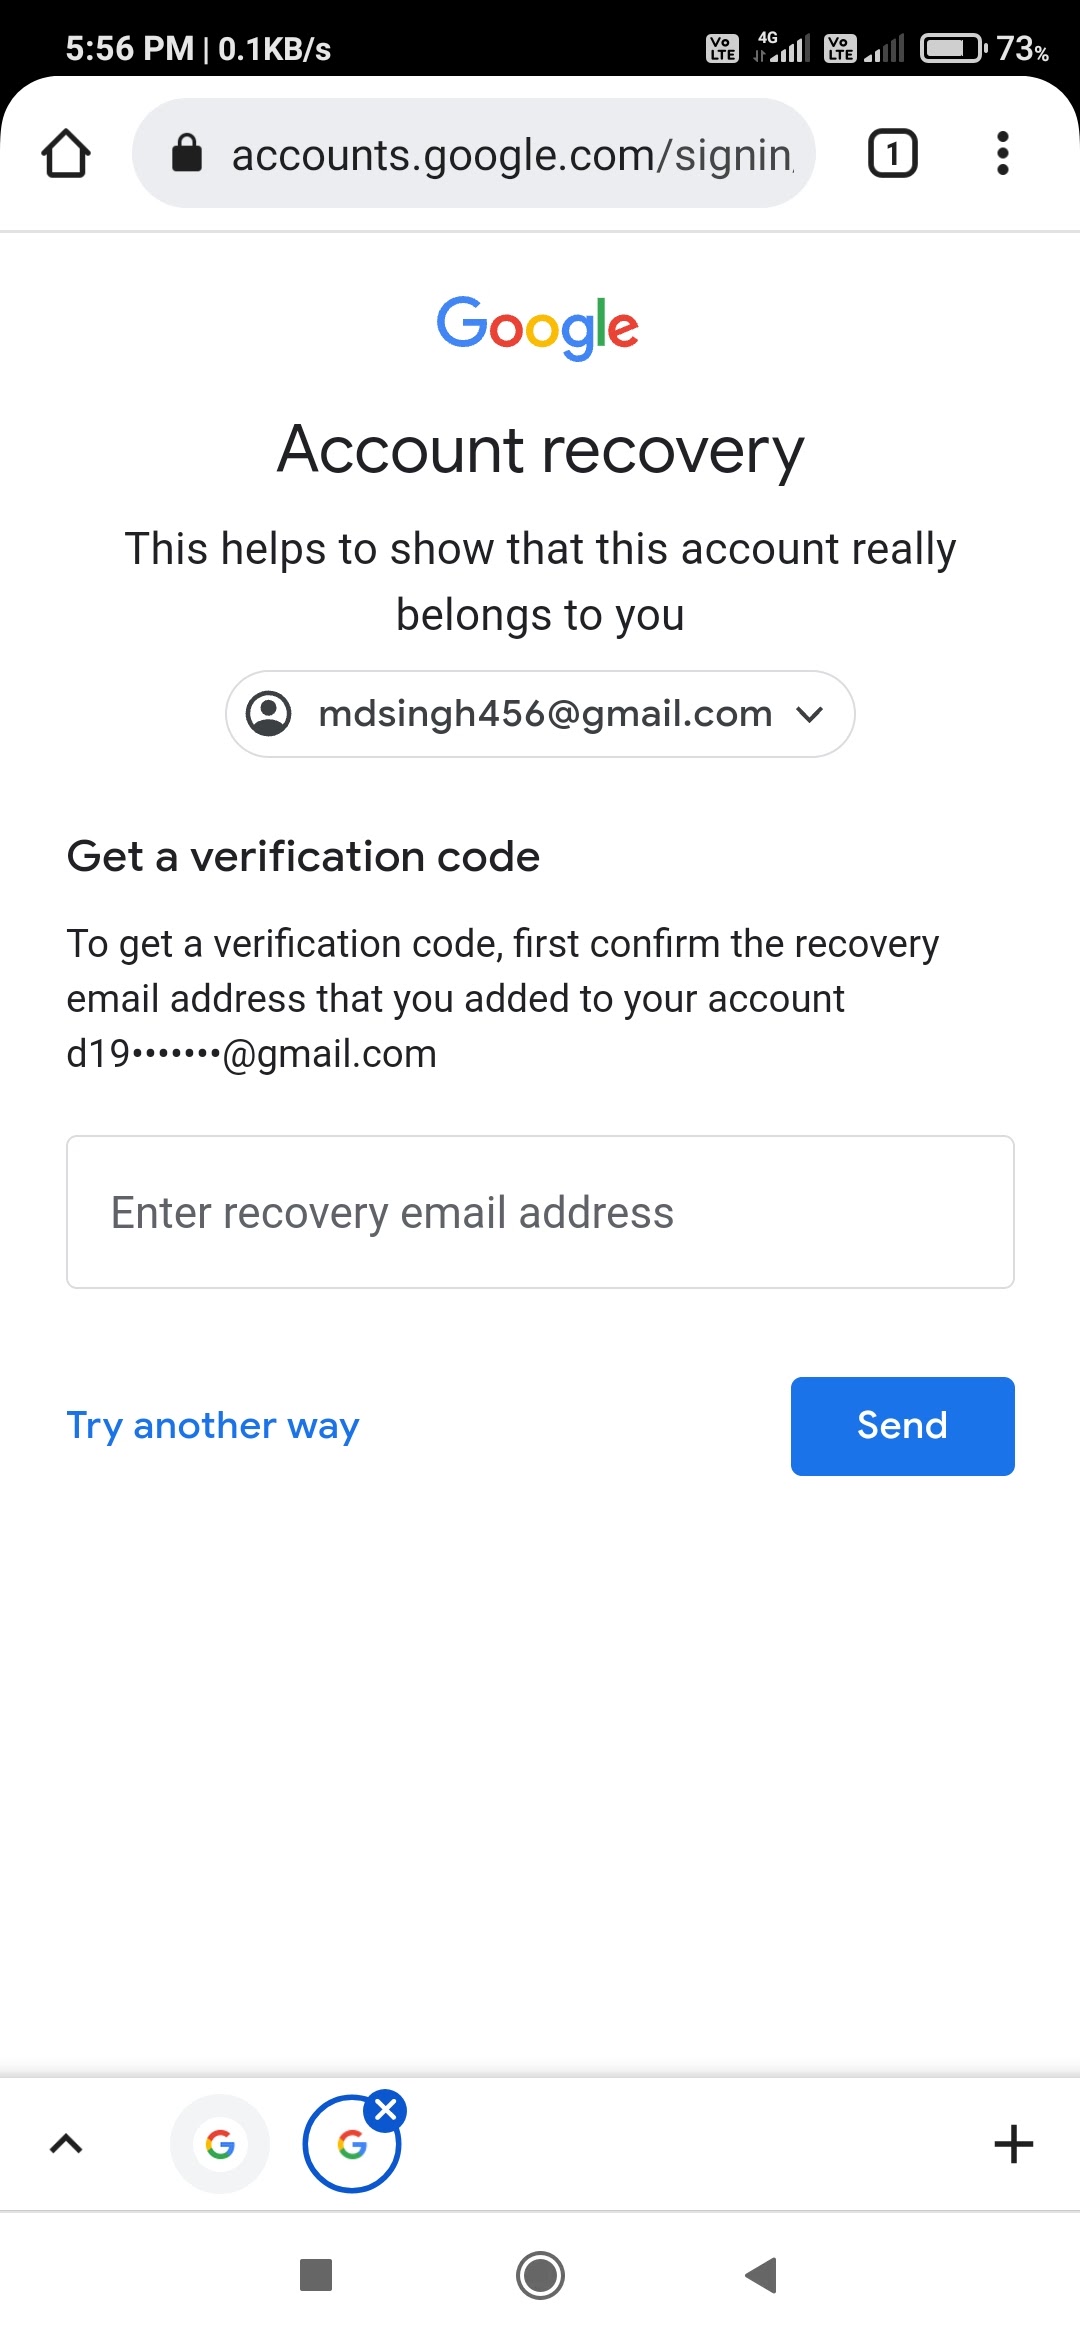 How do I find my email and password for Google?